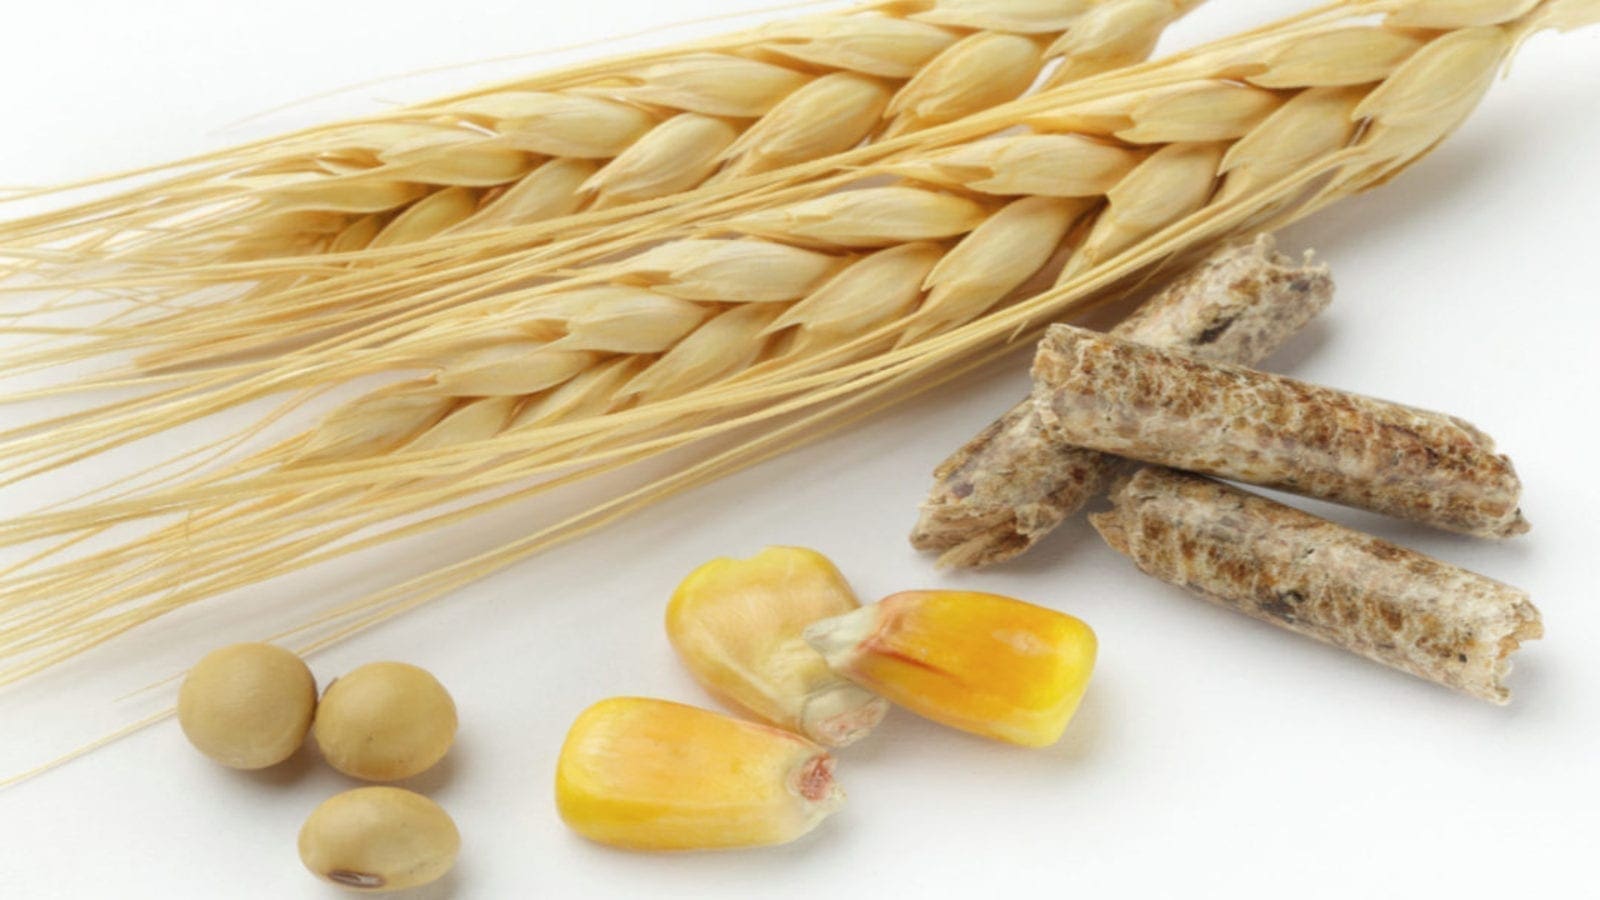 UK joins the International Grain Council after exiting the European Union